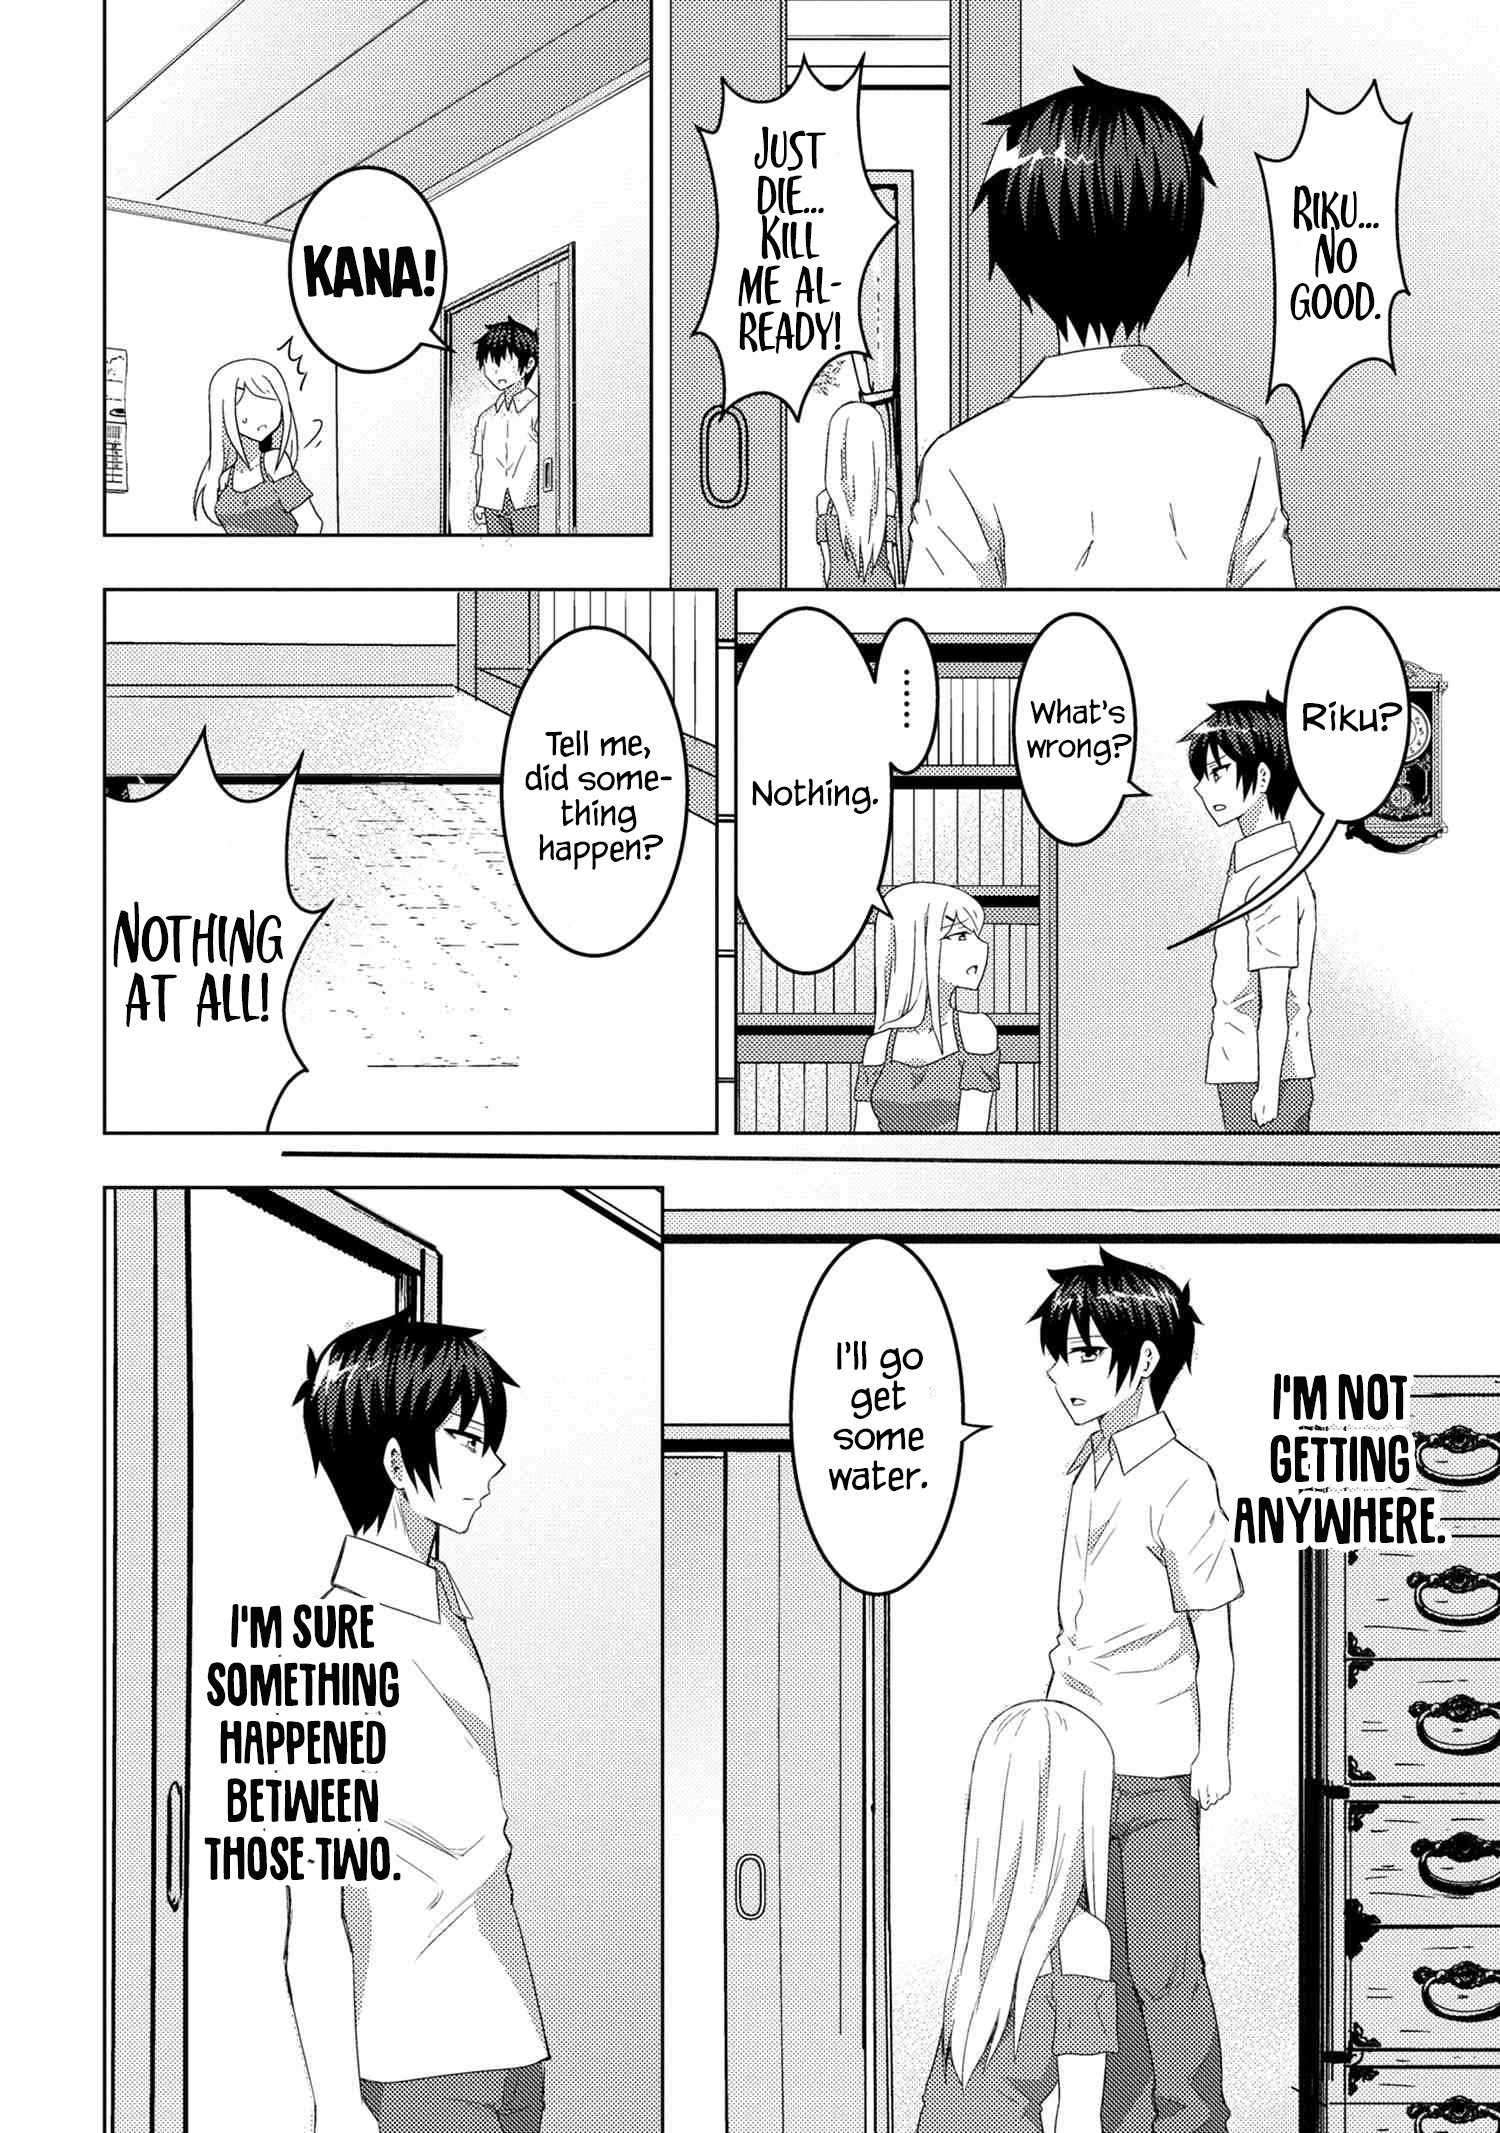 The Sobbing Clerk I Helped From the Convenience Store’s Robbery Is in Fact a Naive and Cute Gal From My Class - chapter 10.2 - #4